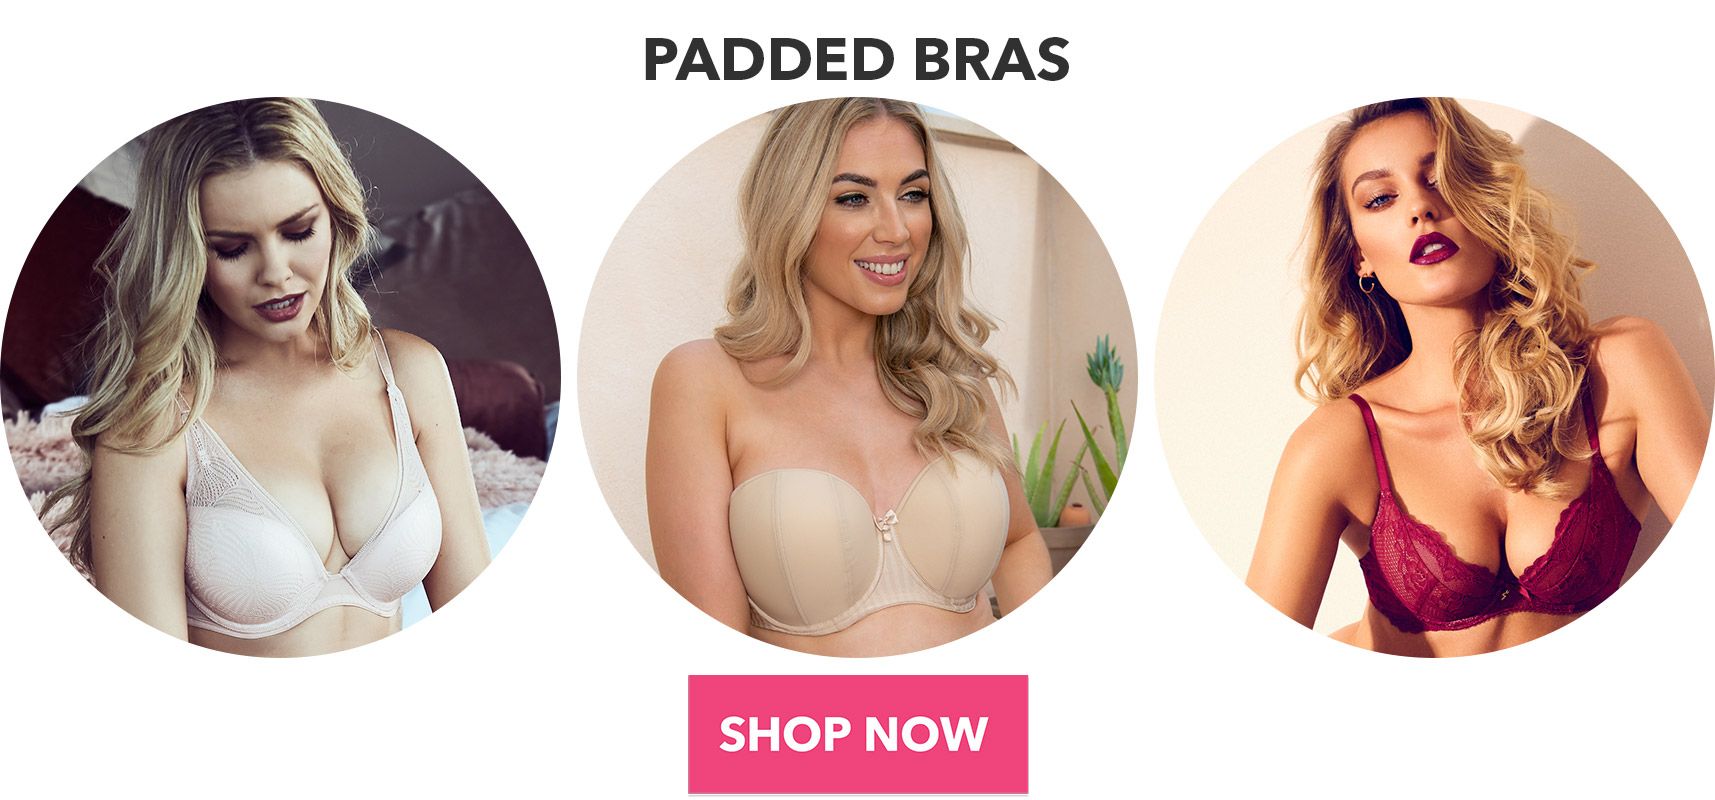 padded bras shop now